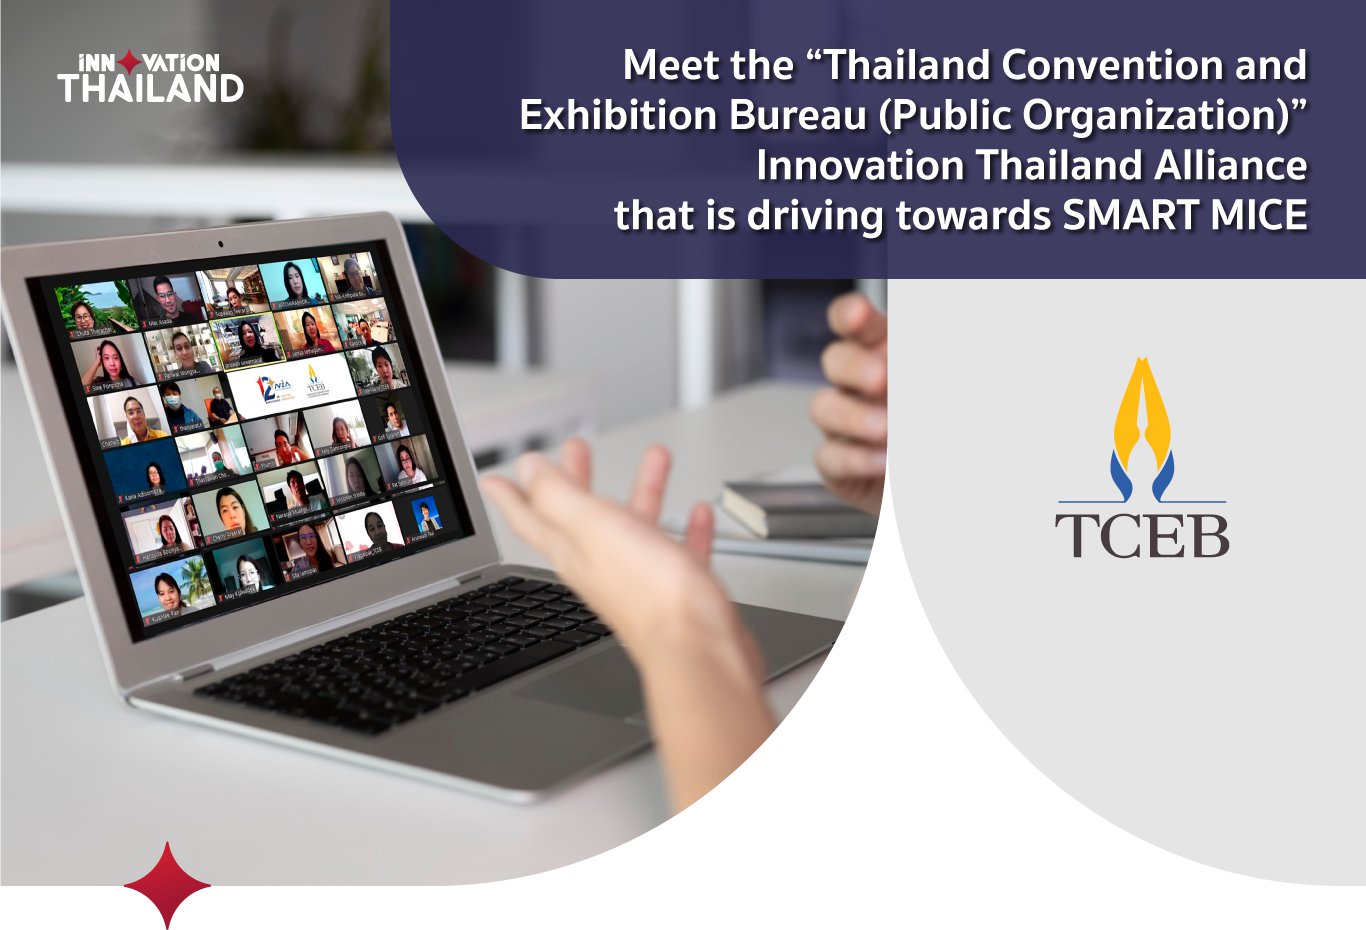 Meet the Thailand Convention and Exhibition Bureau (Public Organization) Innovation Thailand Alliance that is driving towards SMART MICE